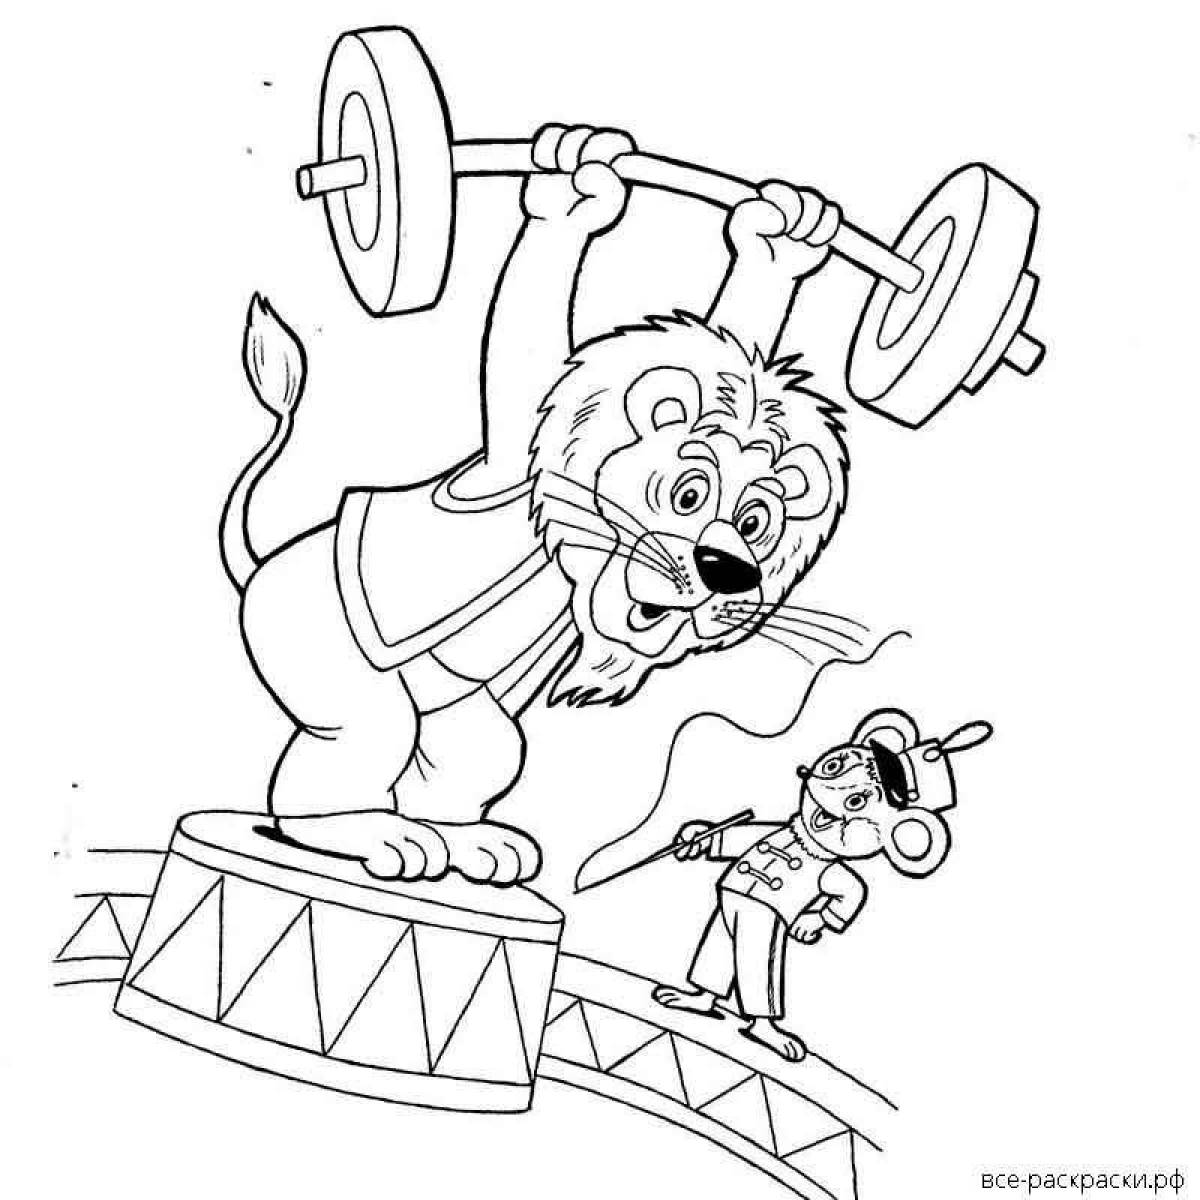 Coloring page funny circus